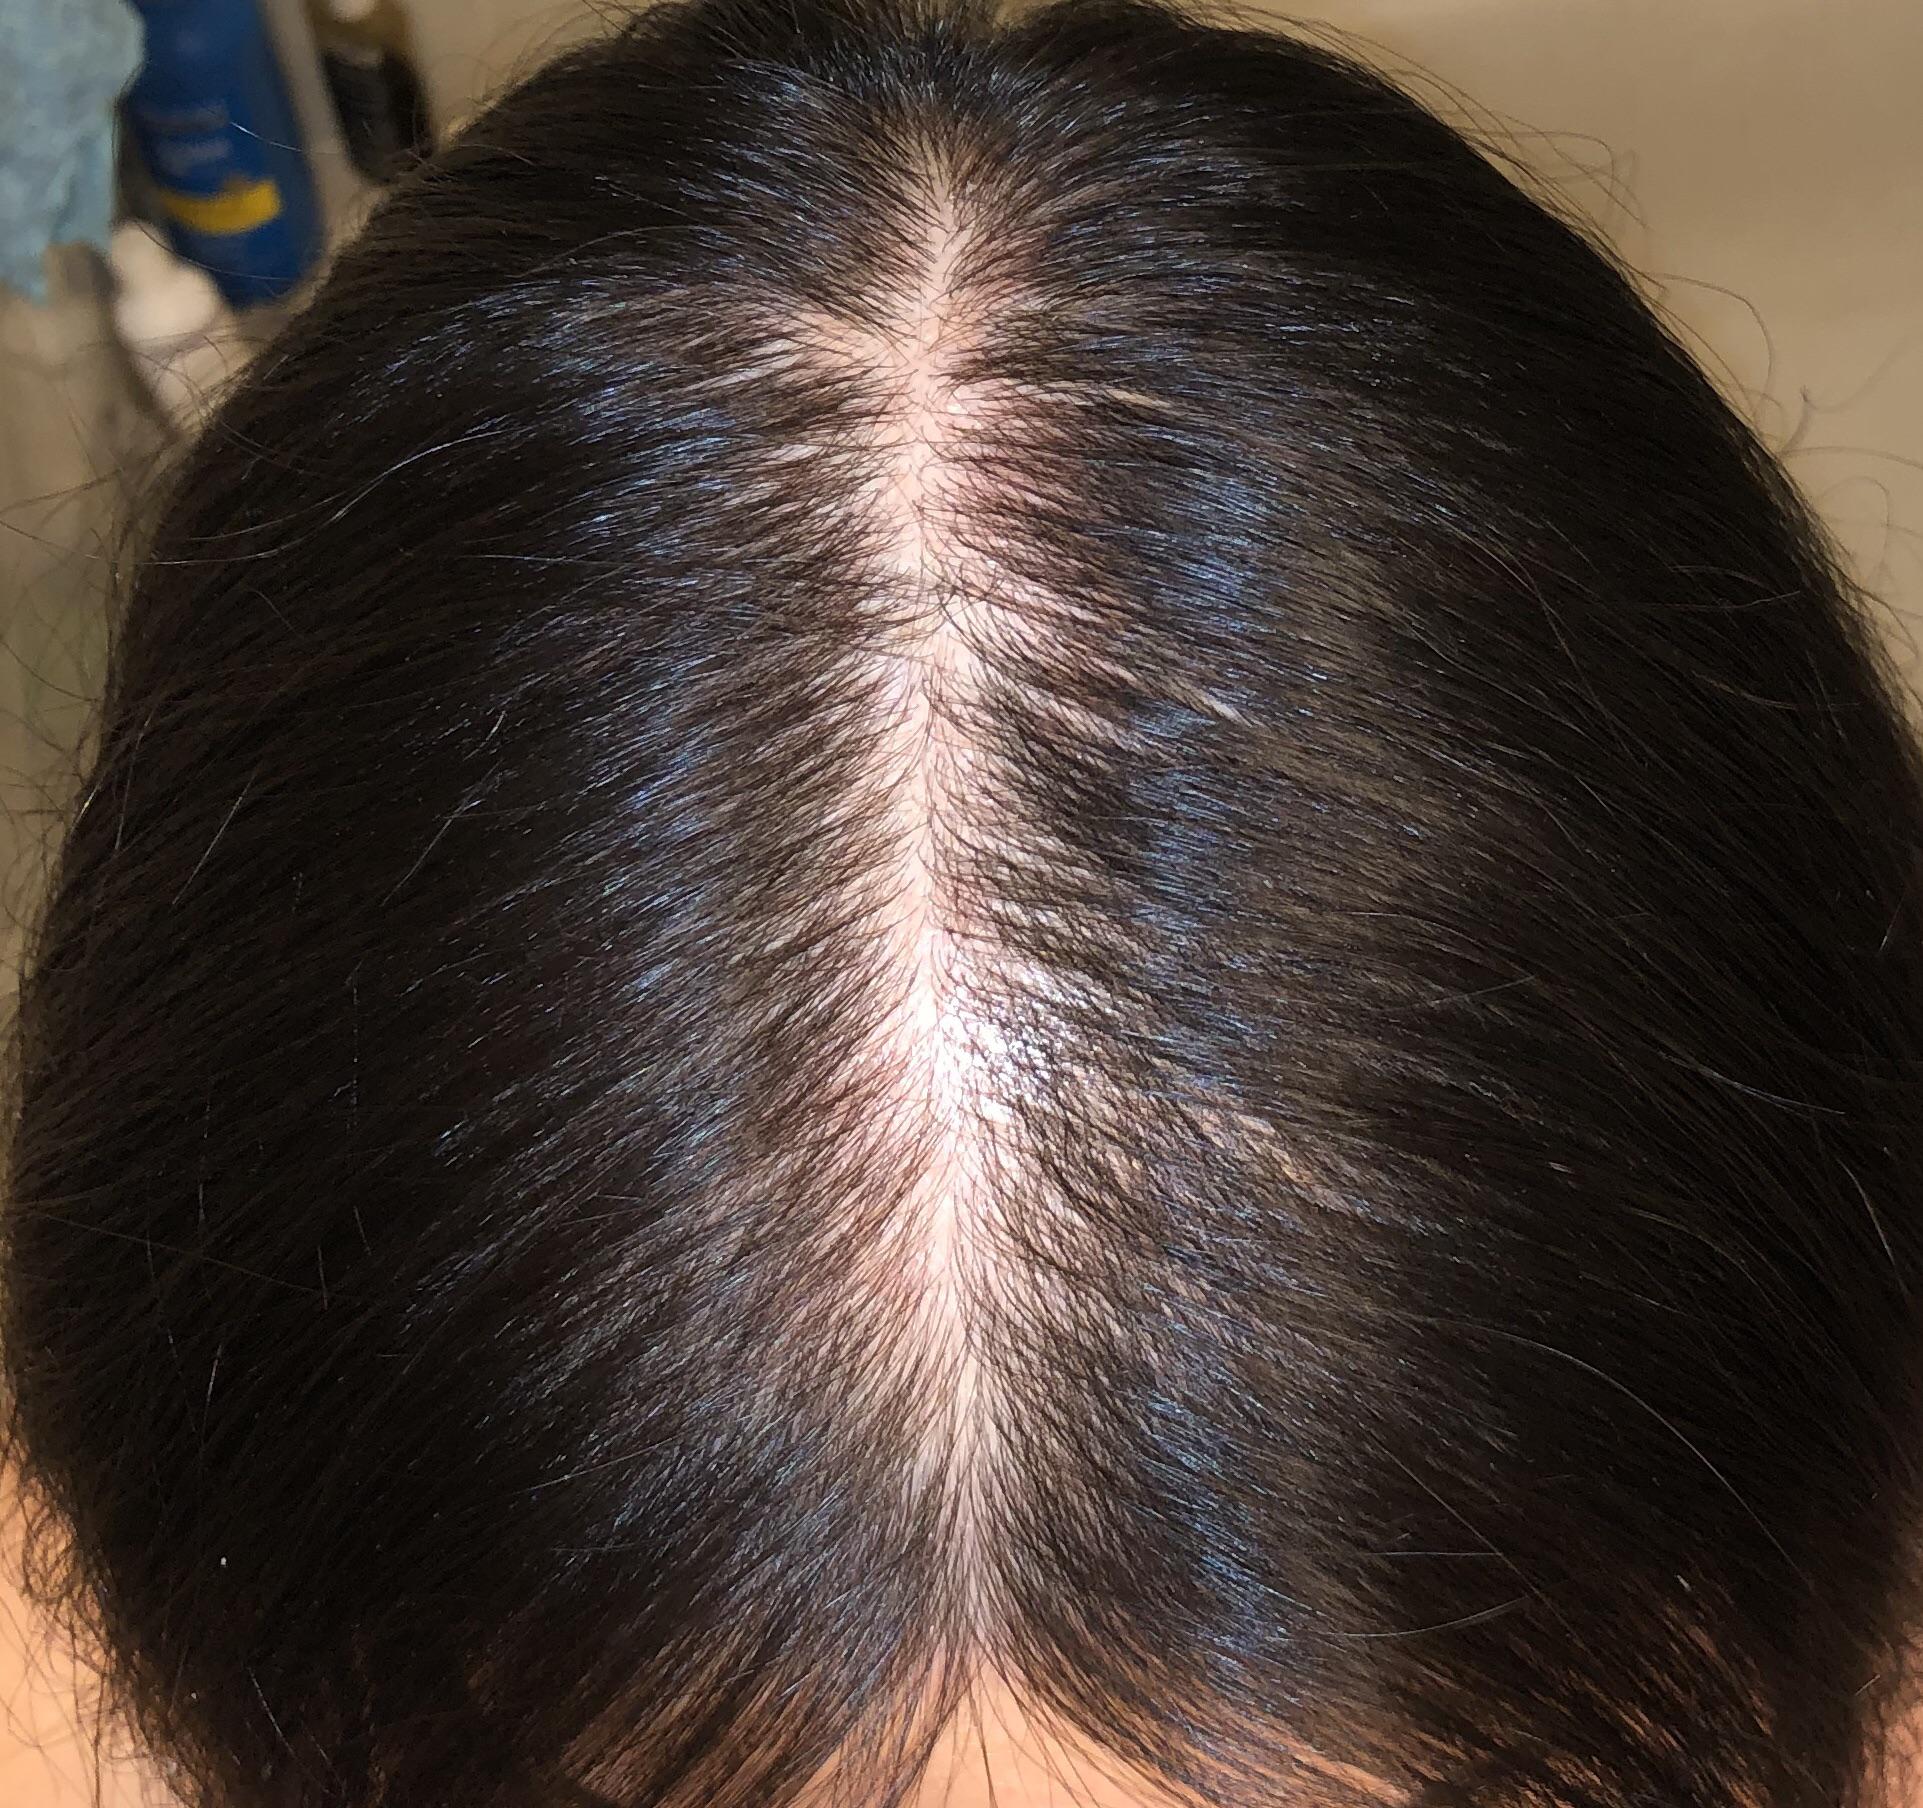 Hair Loss From Psoriasis